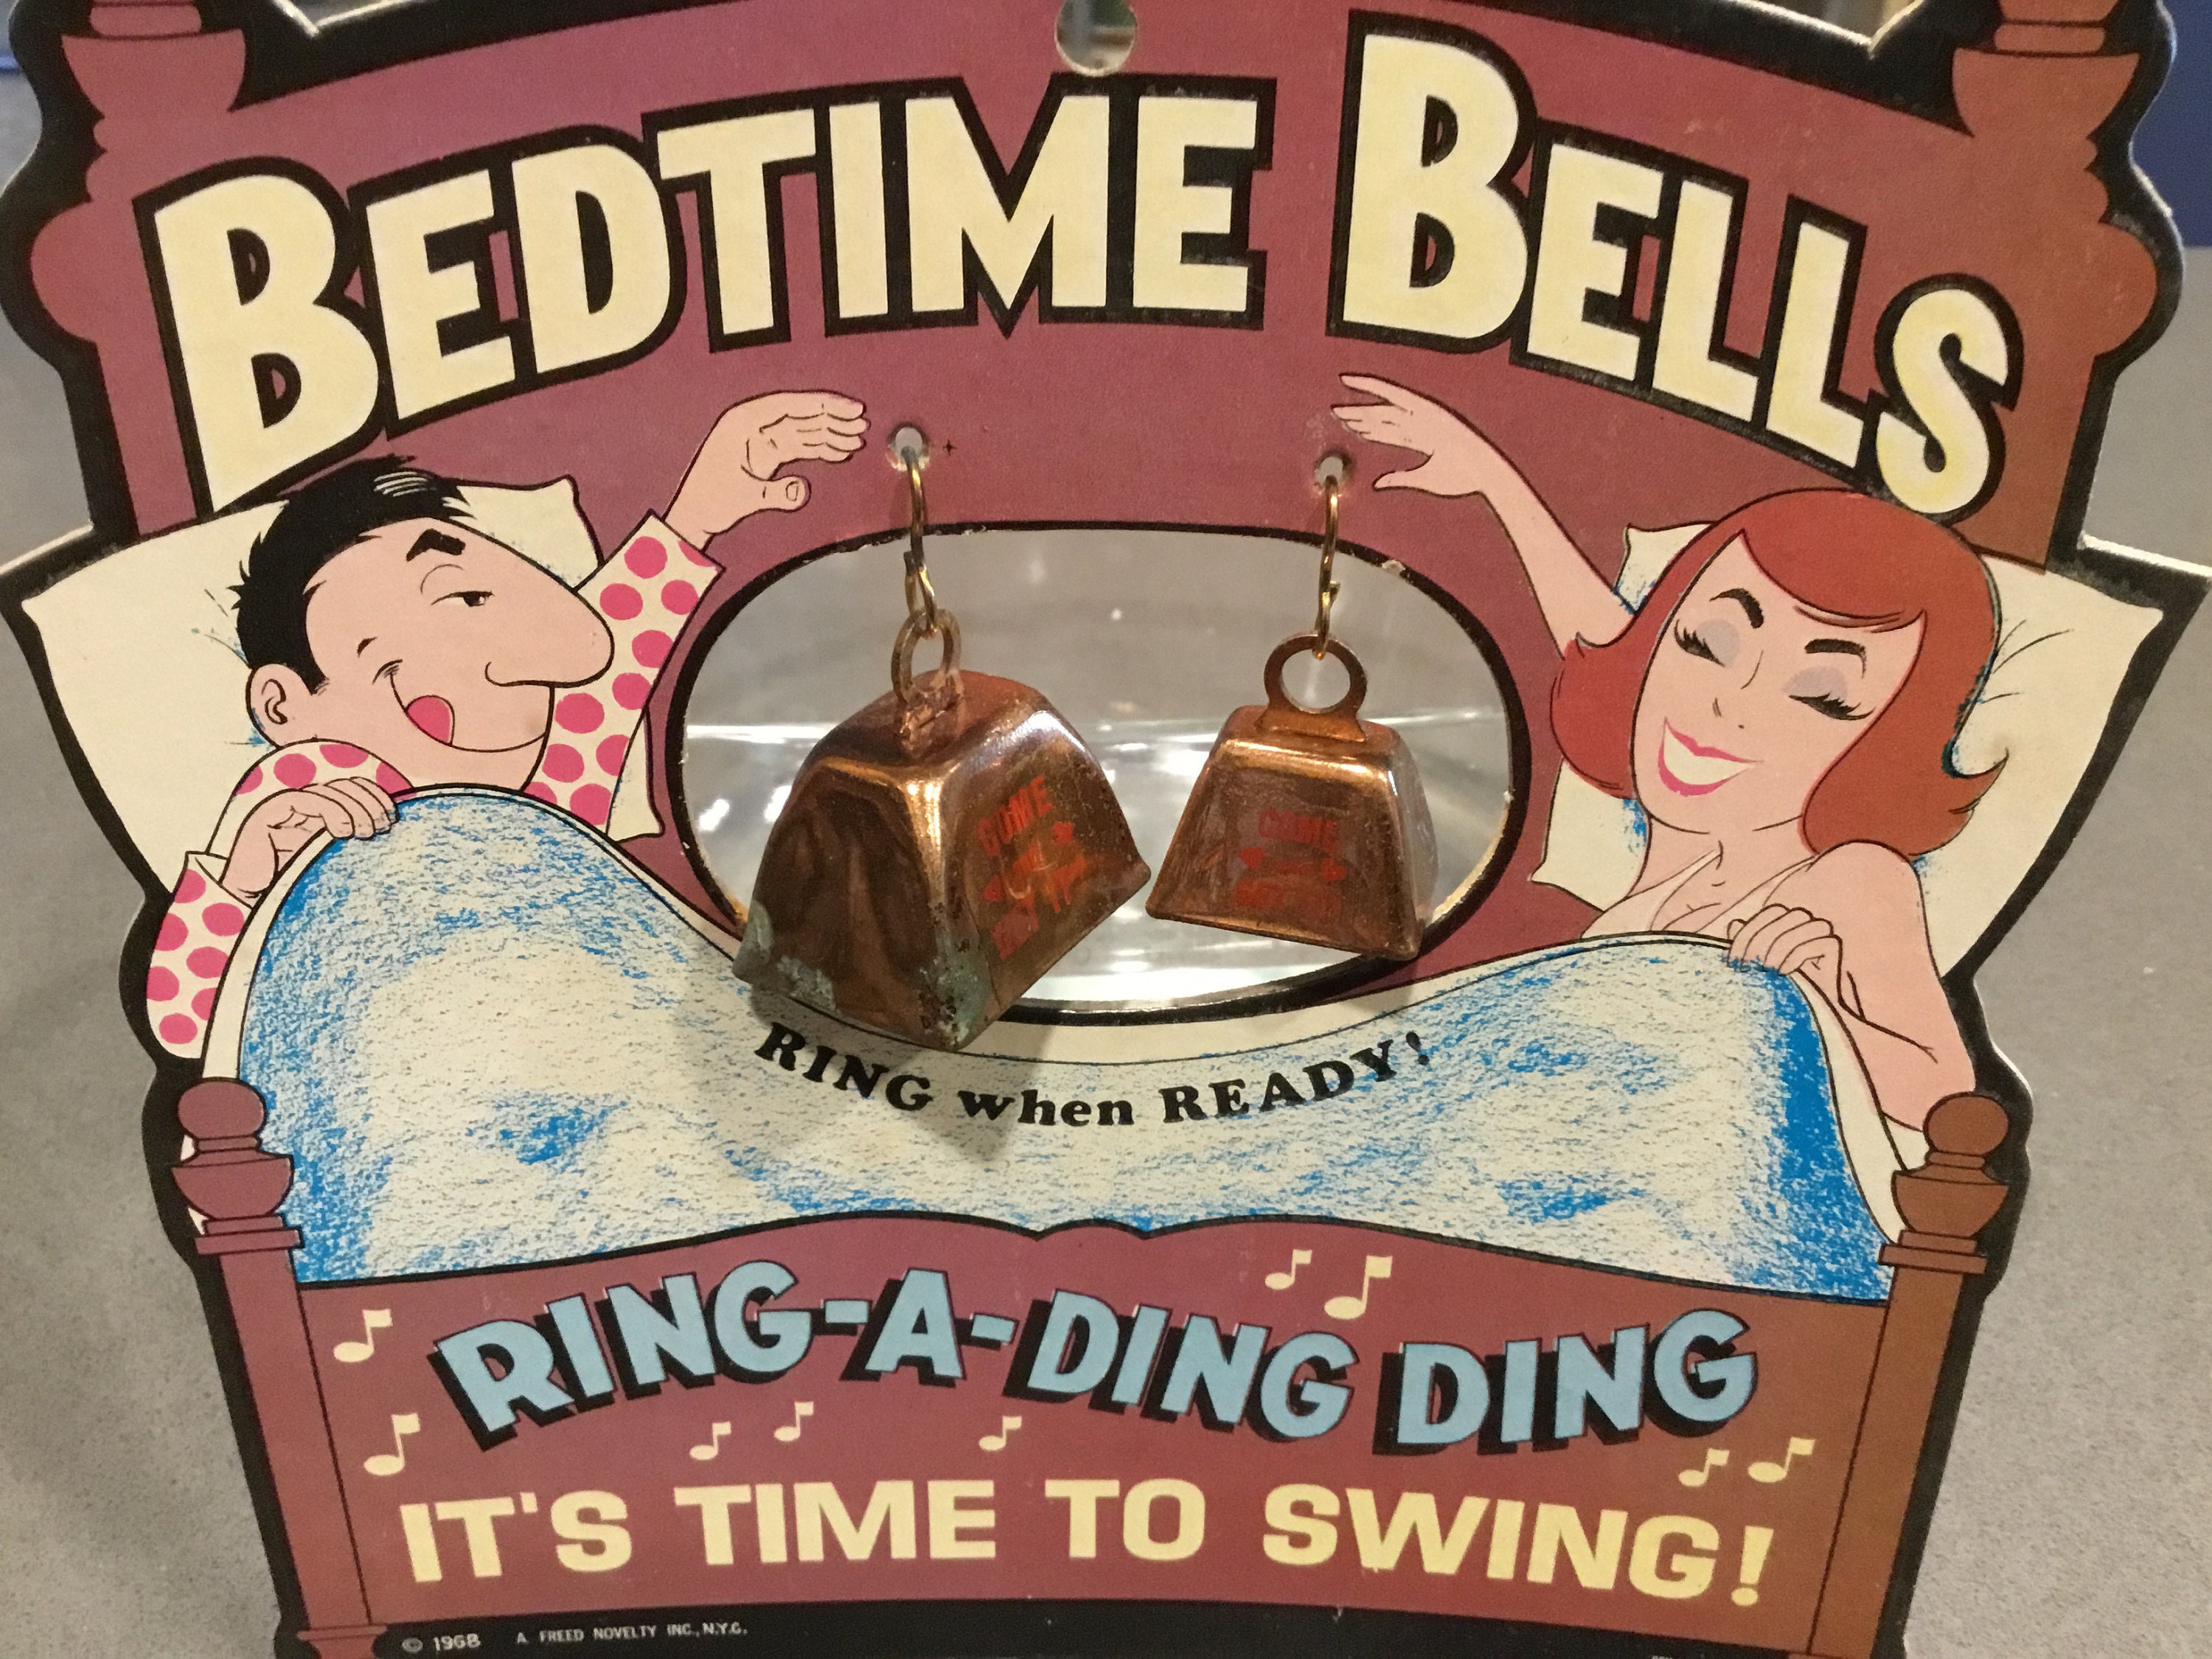 1968 Swingers Bed Time Bells by Freed Novelty Inc NYC ring a picture